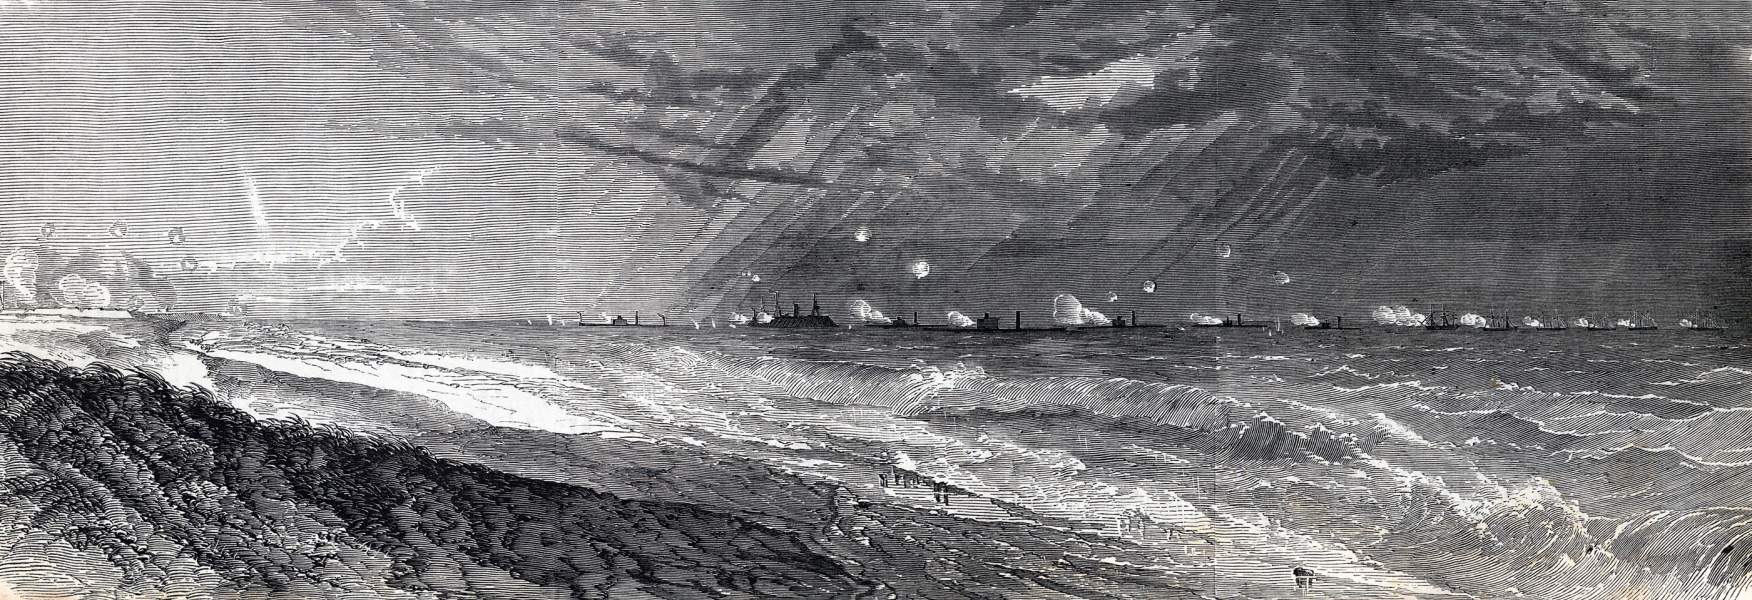 Naval bombardment of Fort Wagner, South Carolina defenses, July 1863, artist's impression, zoomable image